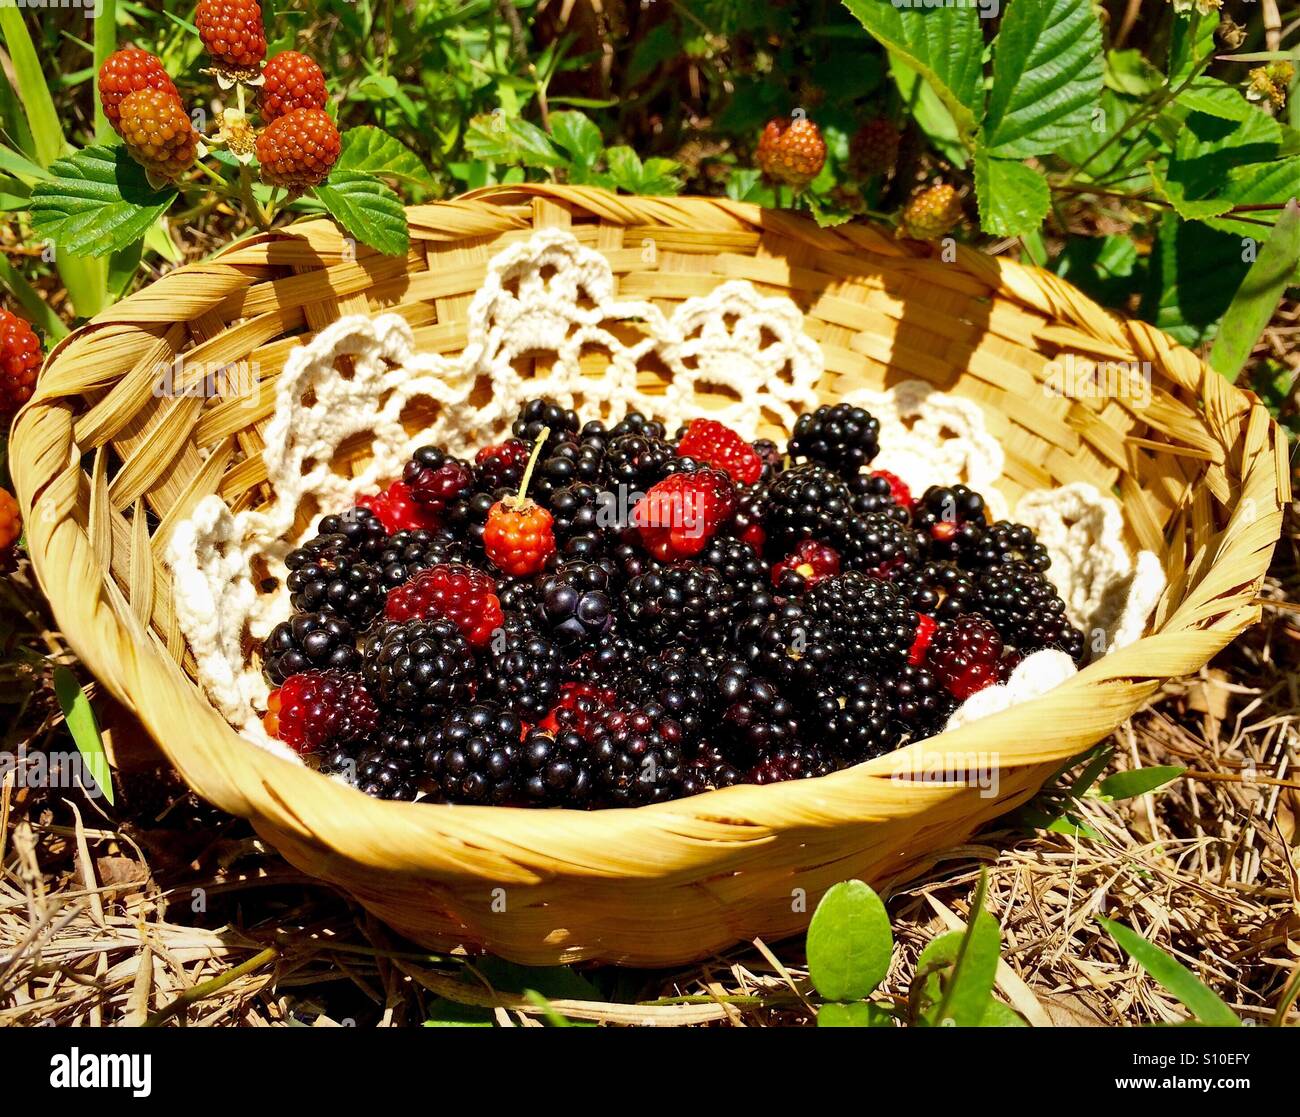 Freshly picked wild blackberries in a basket with ripening berries in background Stock Photo